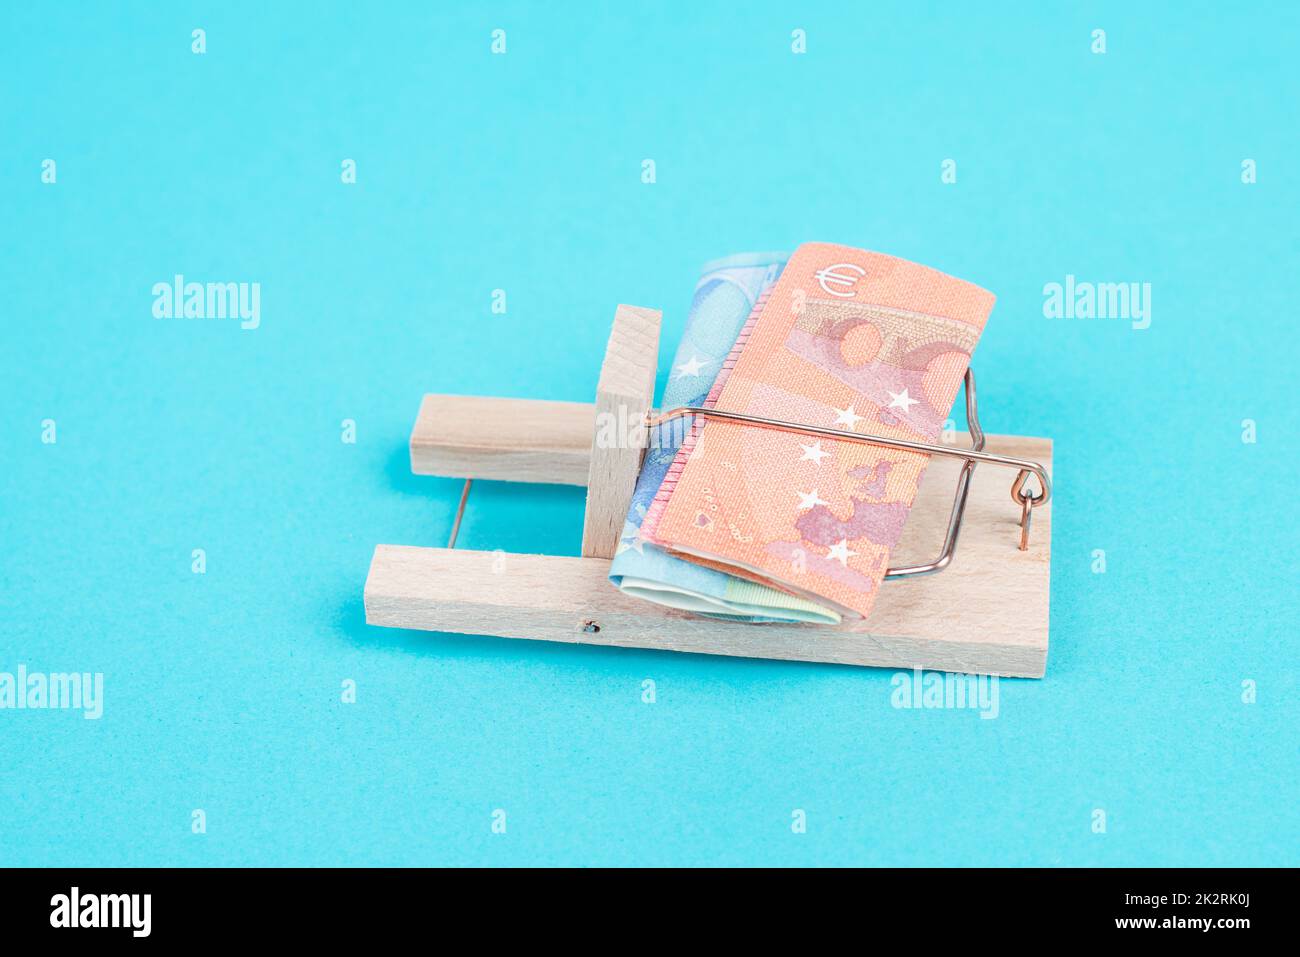 Euro banknotes in a mousetrap, bank loan, finanicial debt, inflation, risky credit and investment Stock Photo